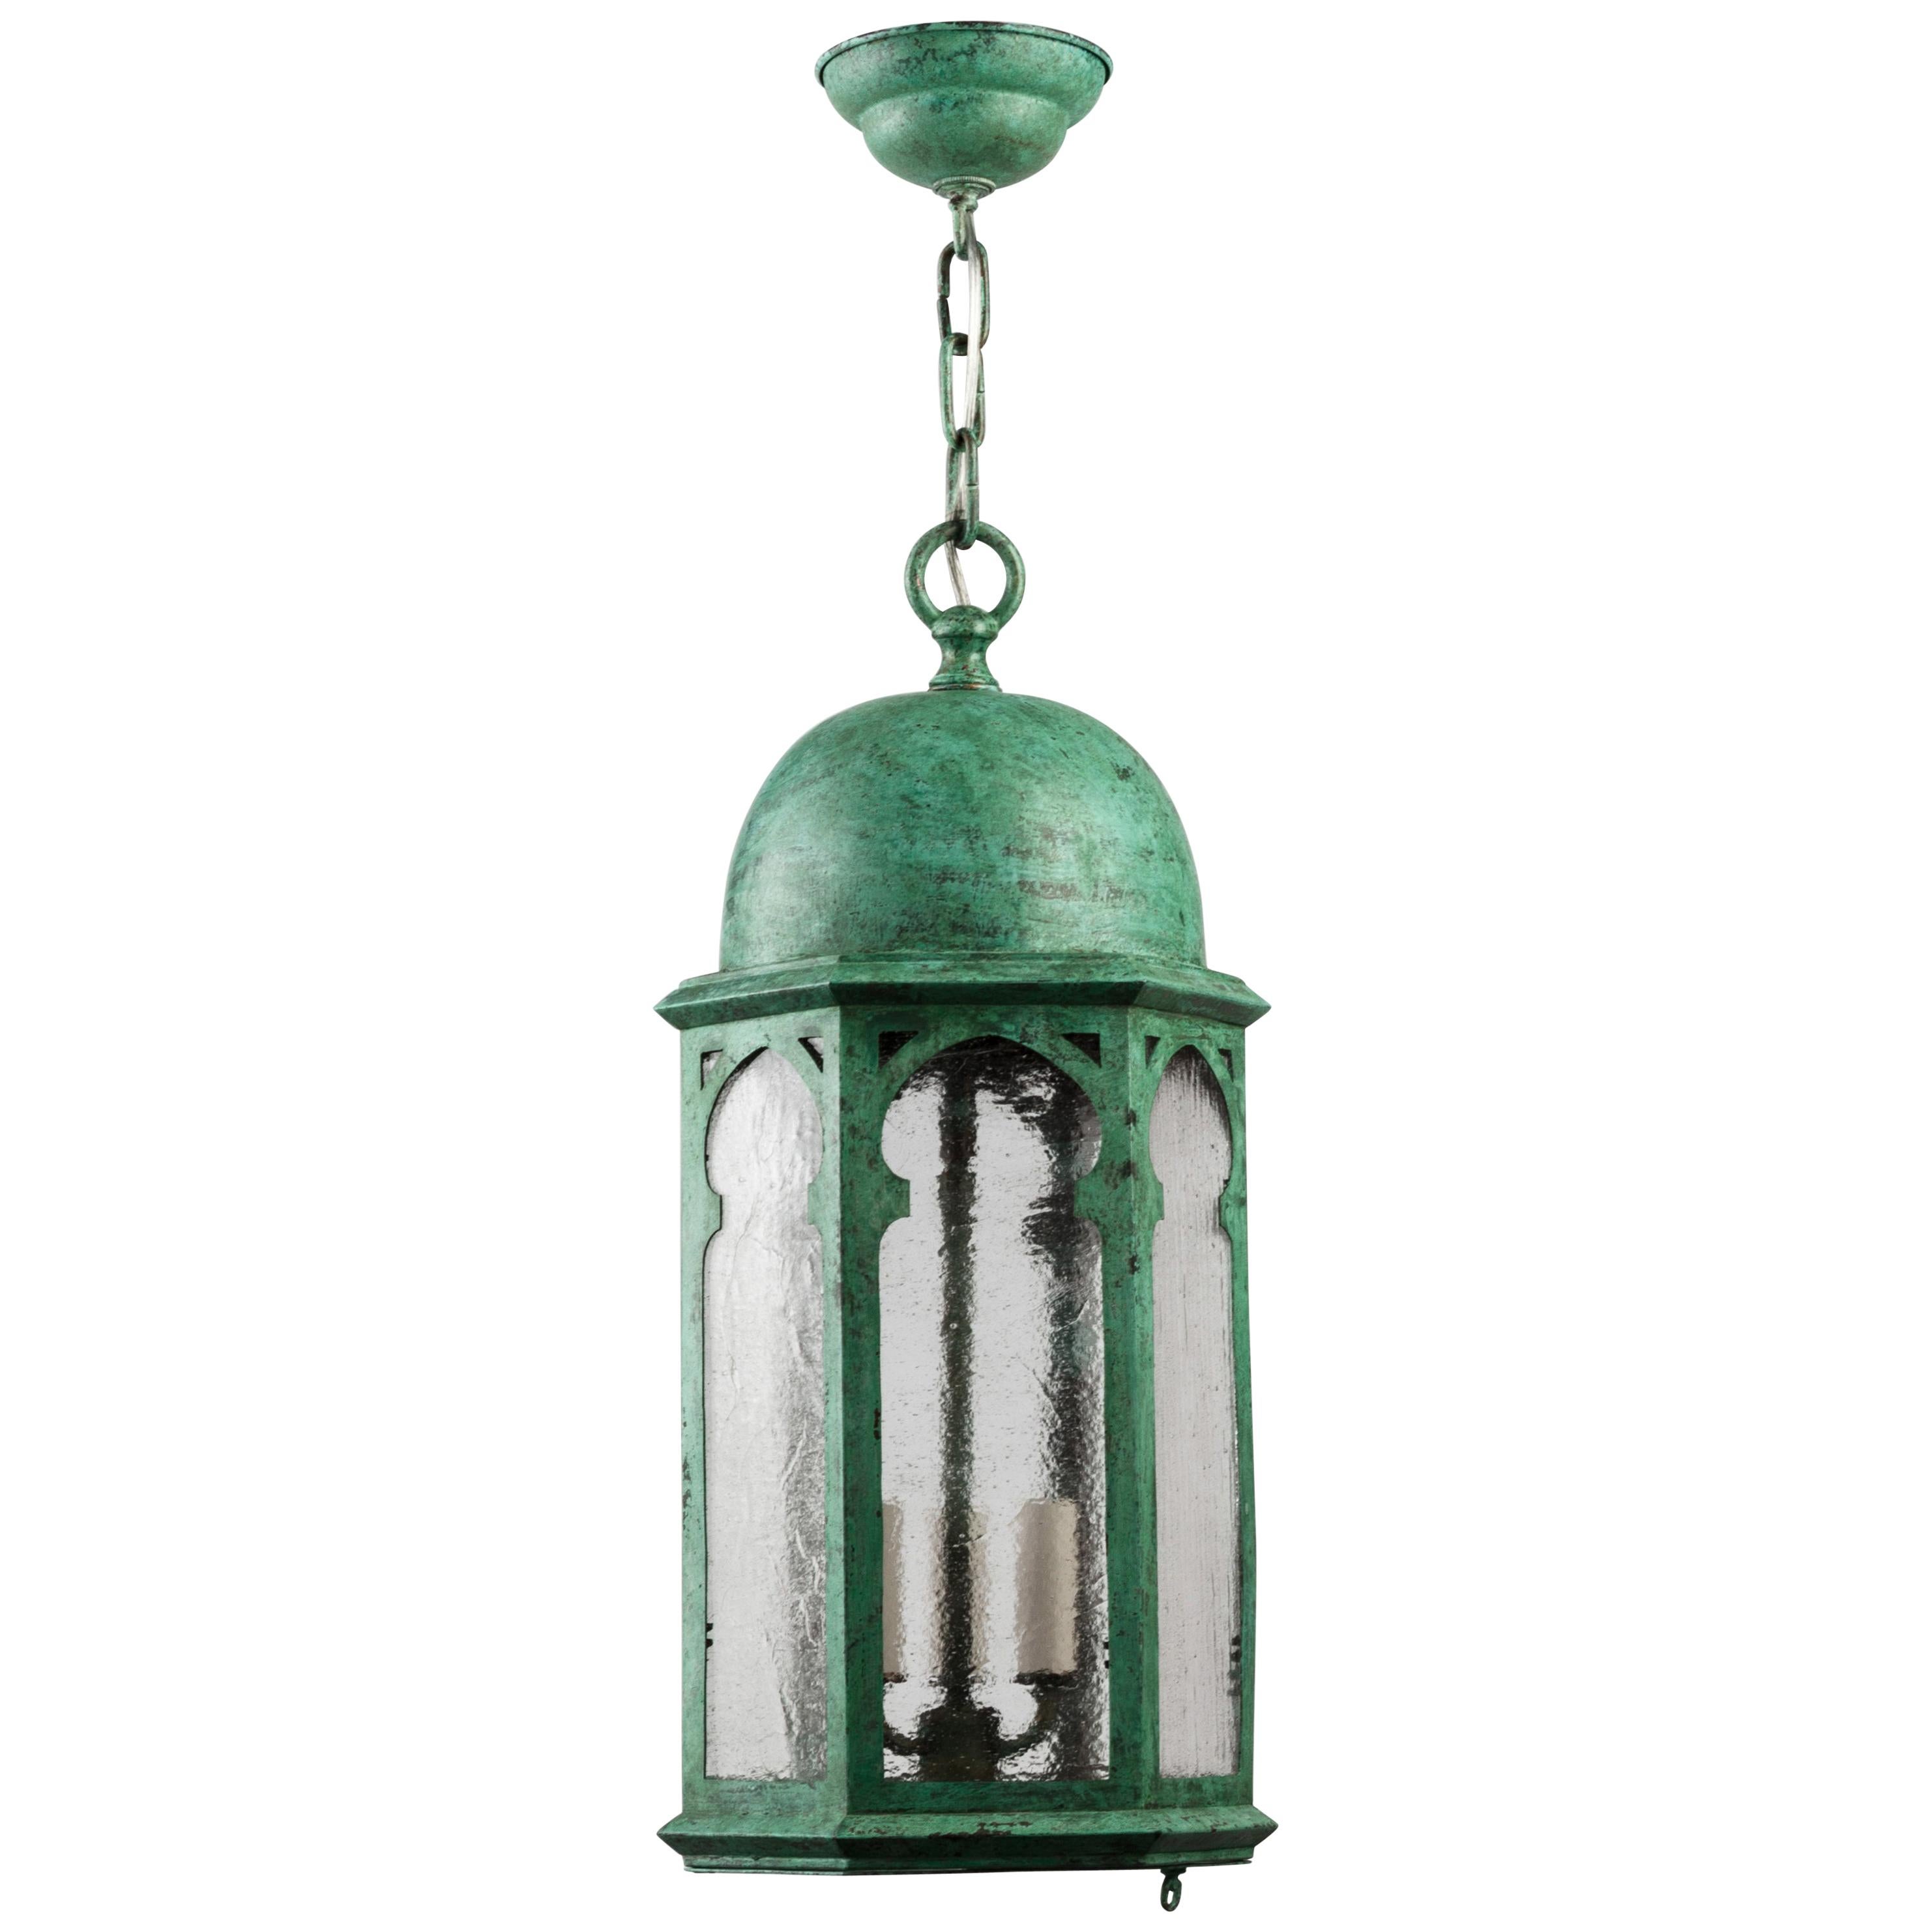 Gothic Style Verdigris Copper Lantern with Clear Seeded Glass, Circa 1930s